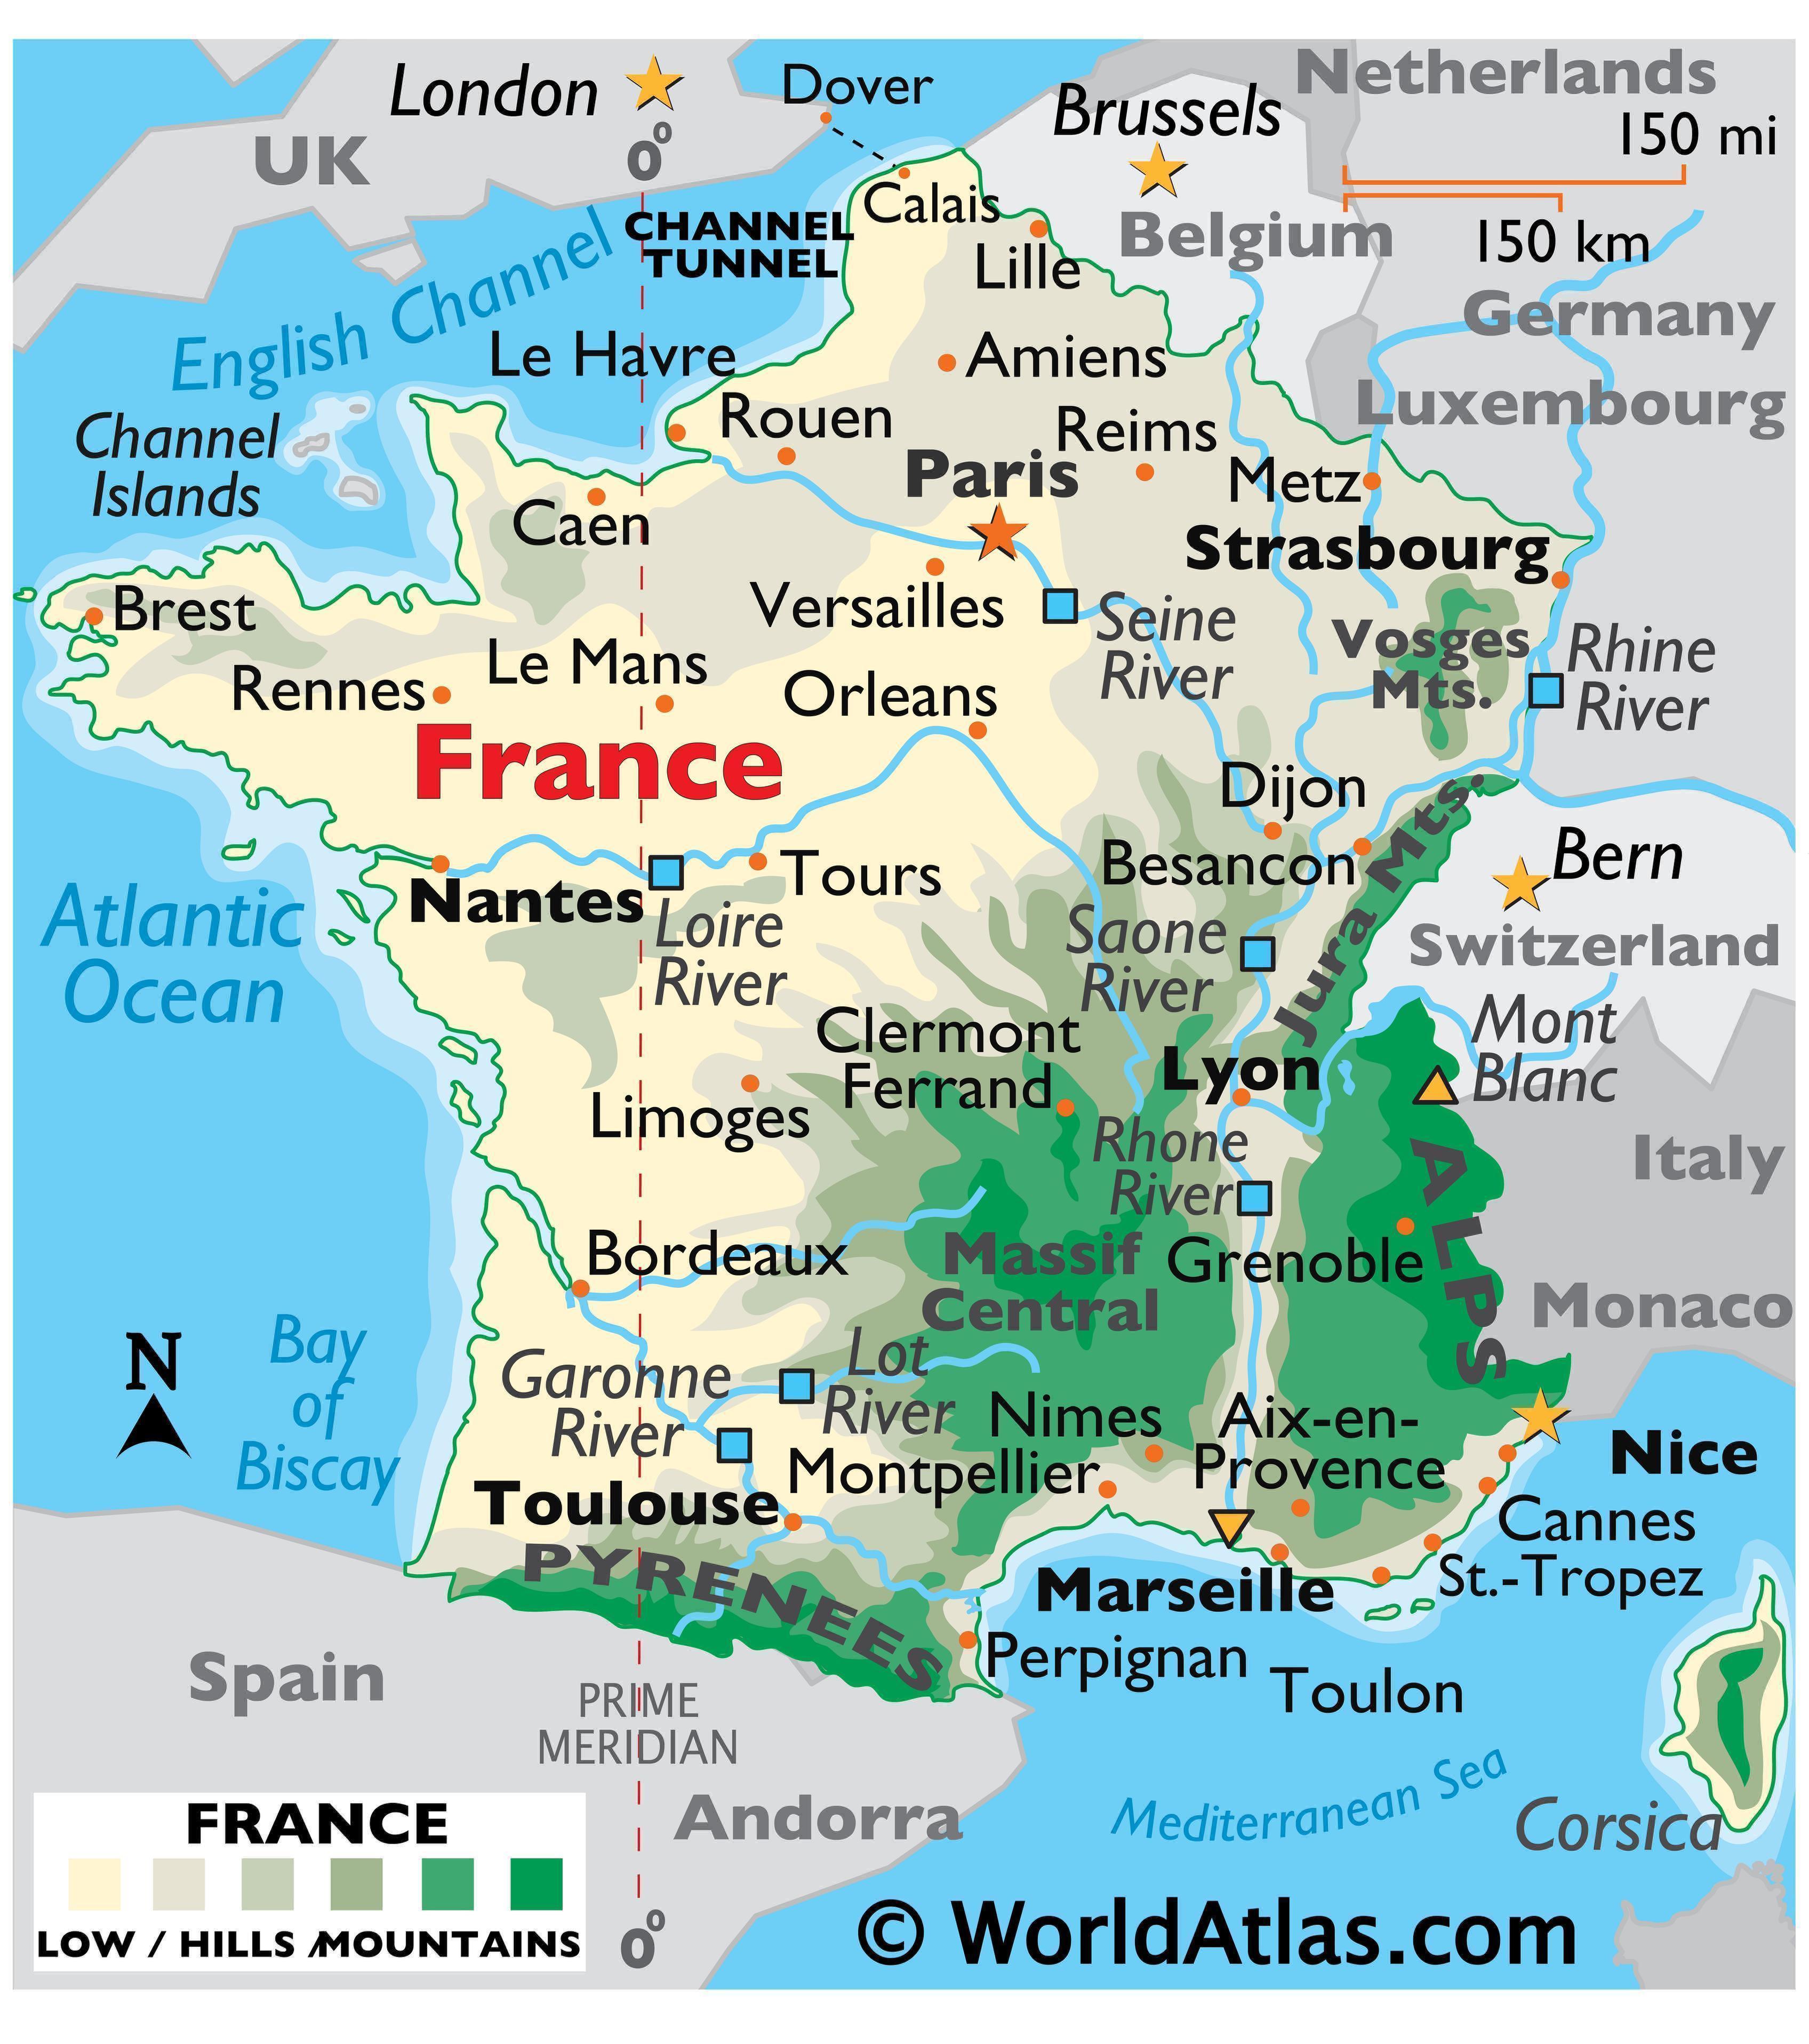 Geographical Map Of France France Map / Geography of France / Map of France   Worldatlas.com